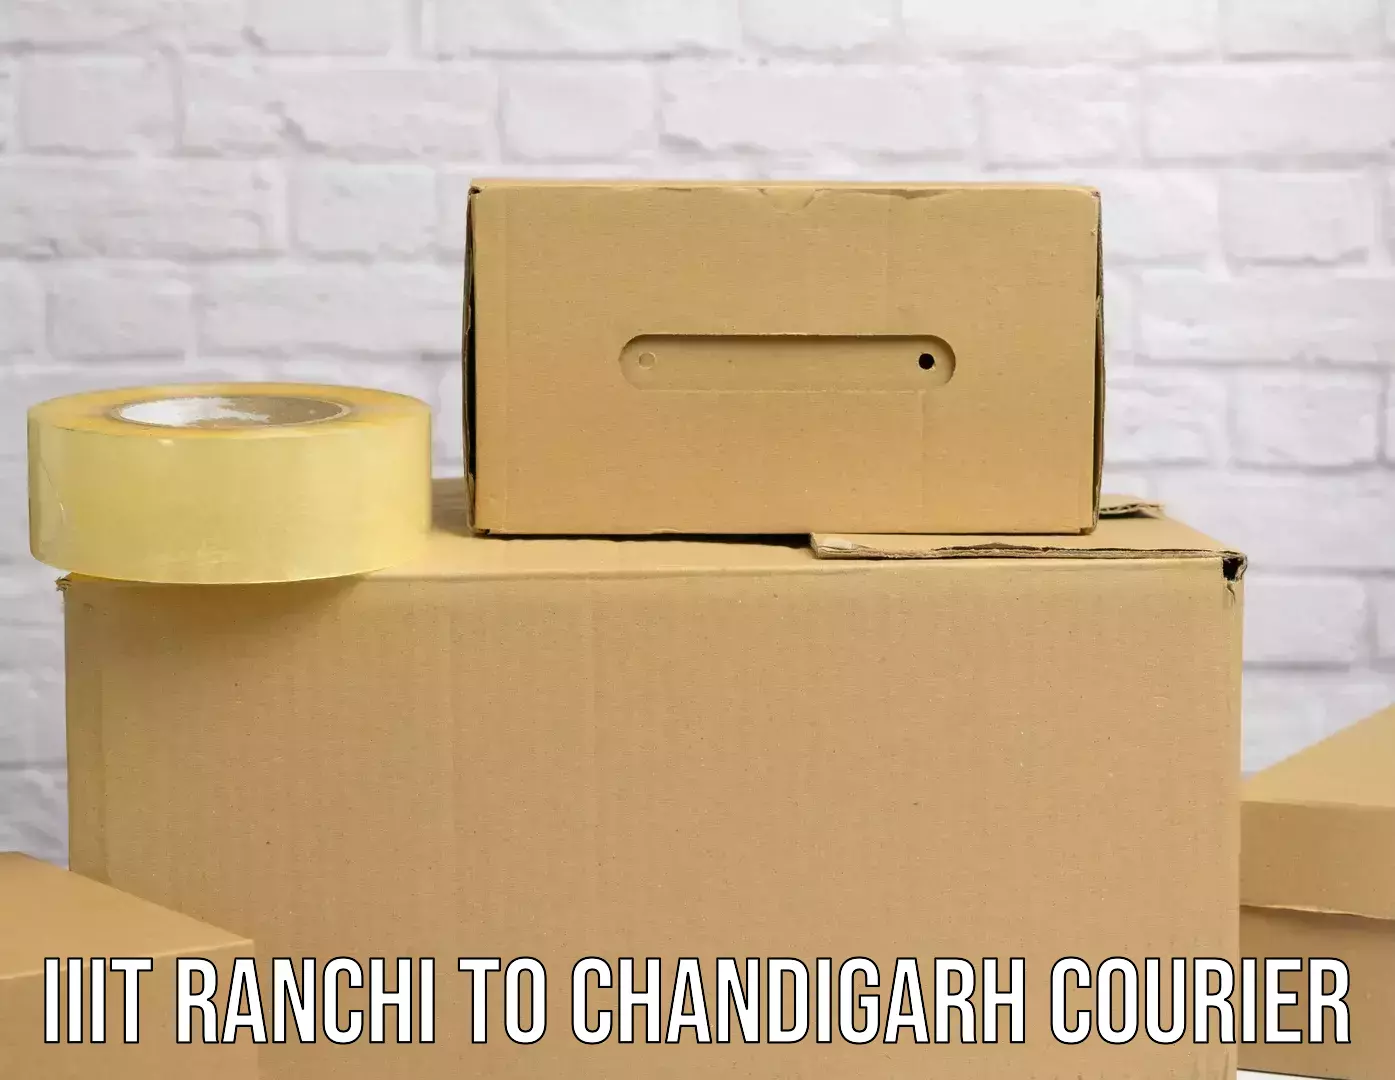 Tech-enabled shipping in IIIT Ranchi to Chandigarh